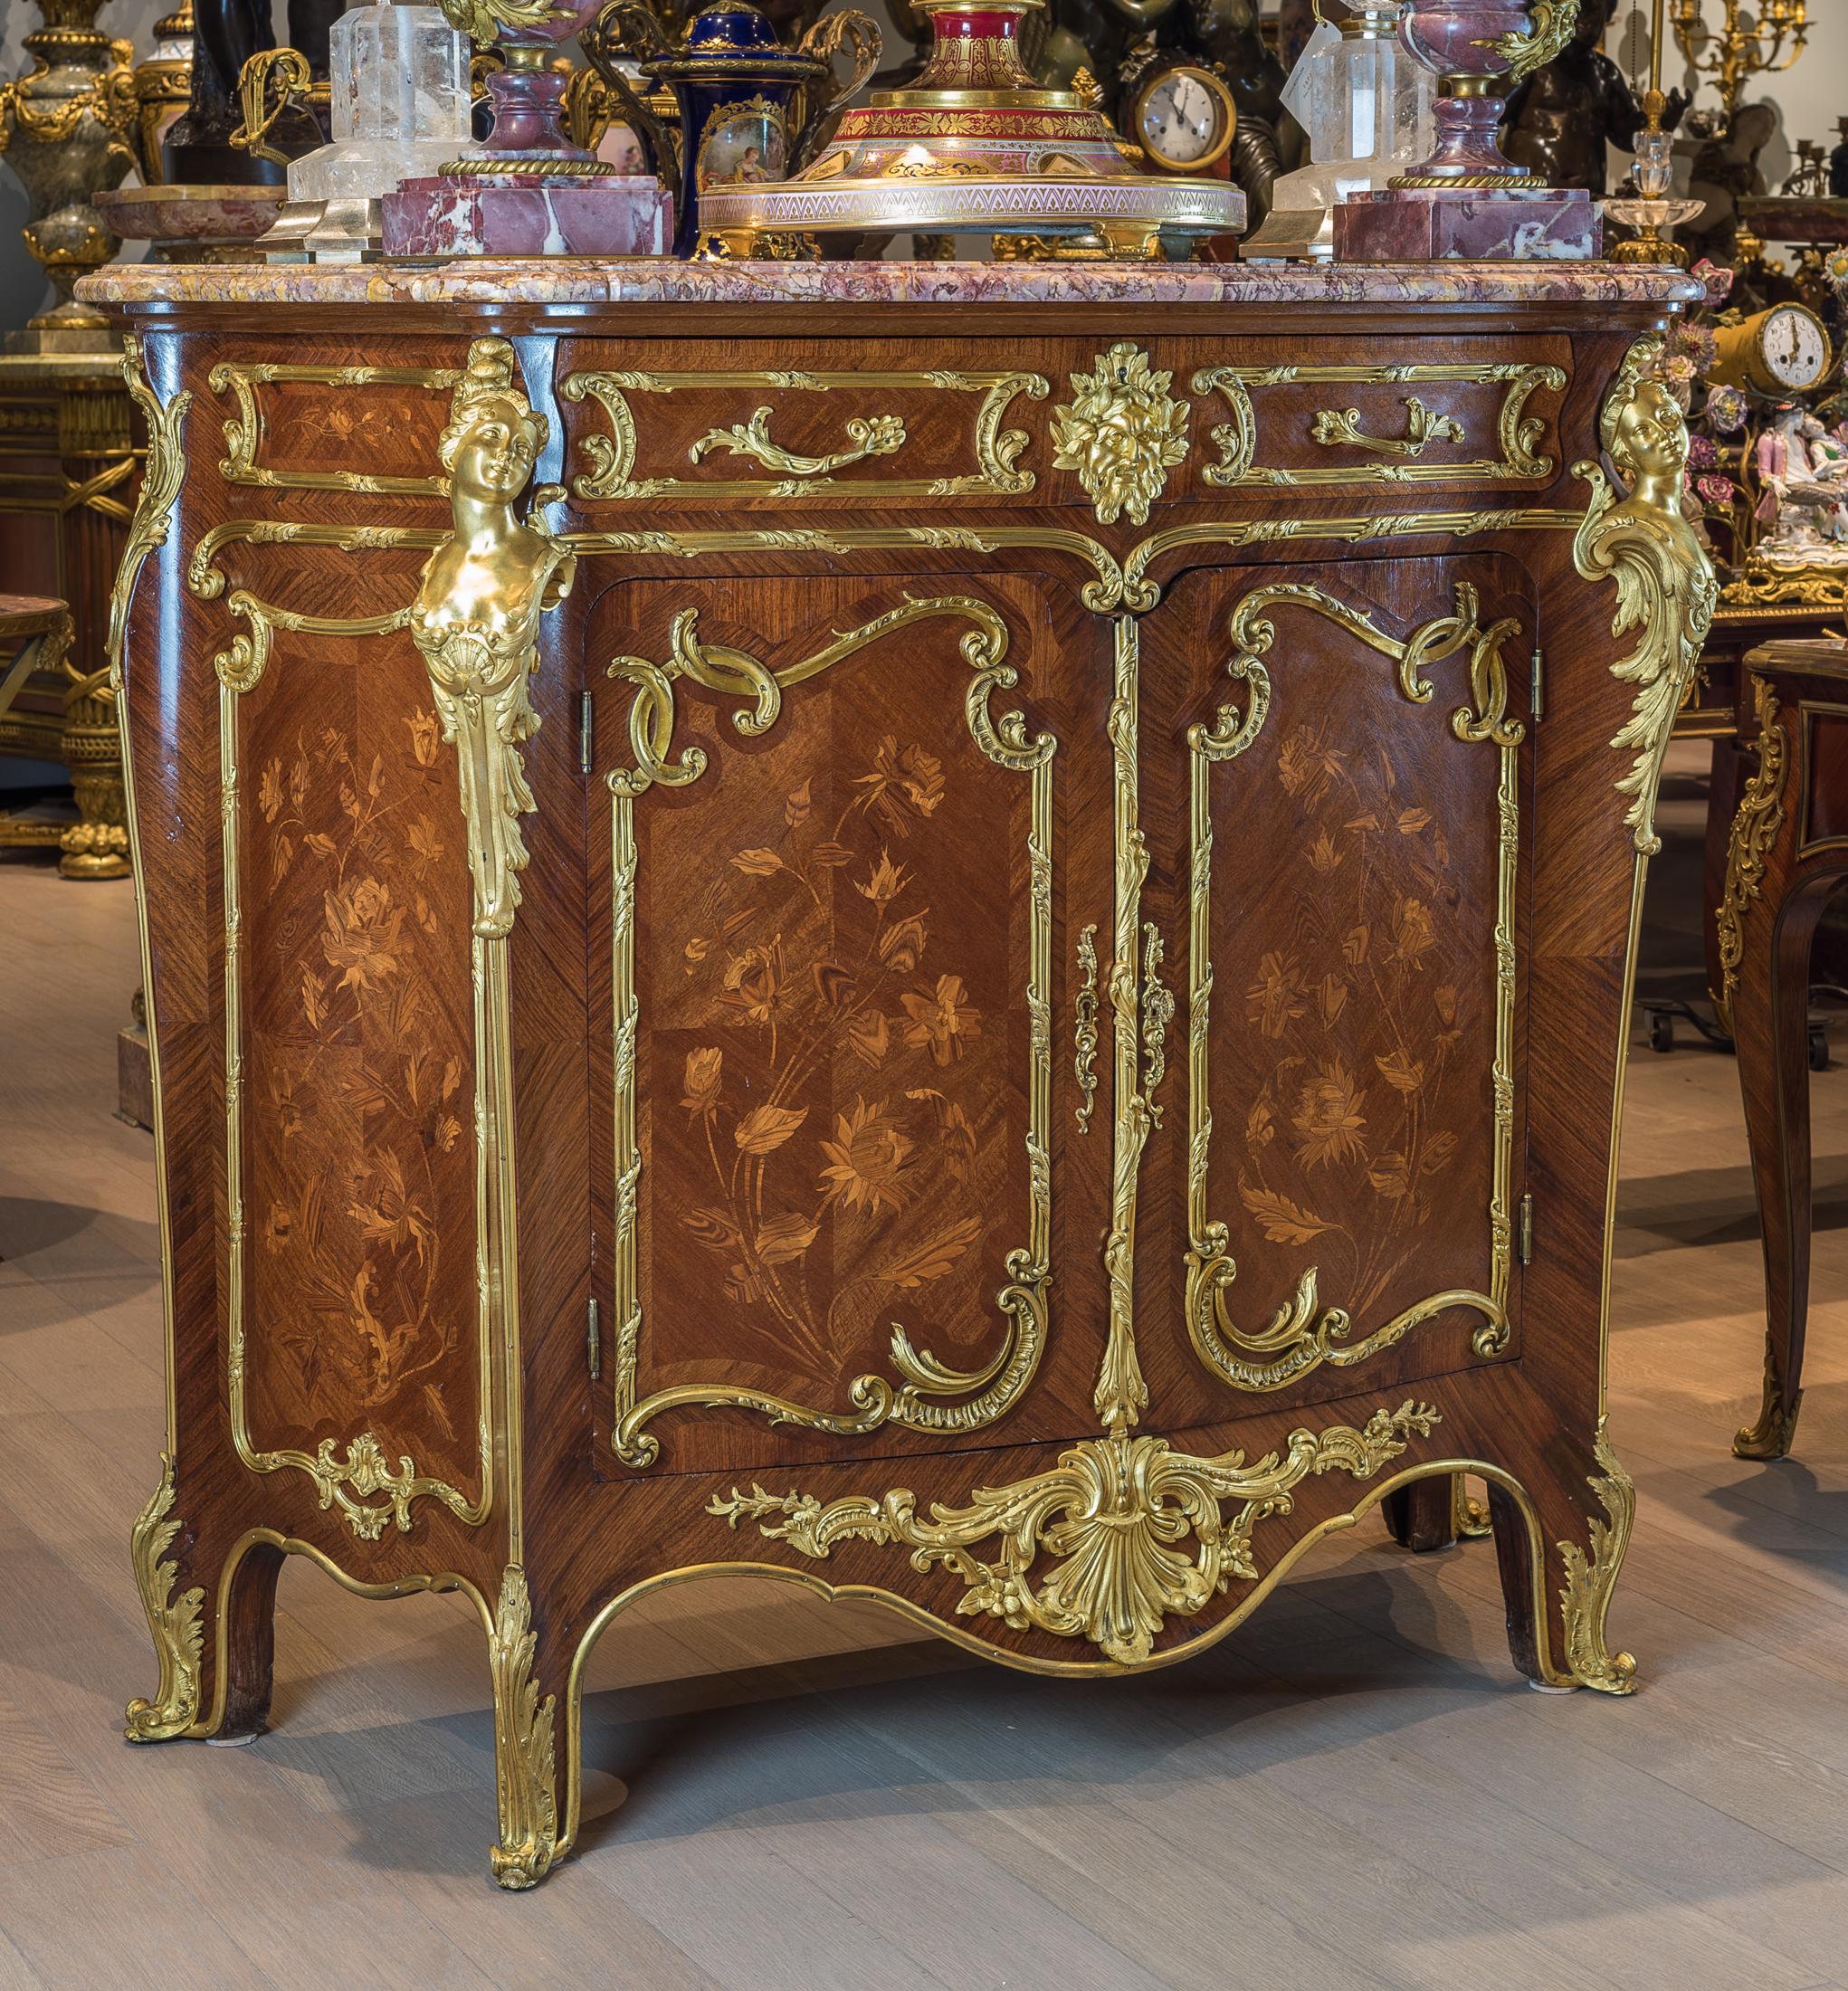 An exquisite pair of Louis XV style ormolu-mounted amaranth and tulipwood marquetry meuble à hauter d'appui credenzas attributed to F. Linke at Fontainebleau. 

Each credenza has a marble top with a central frieze drawer and a large lower